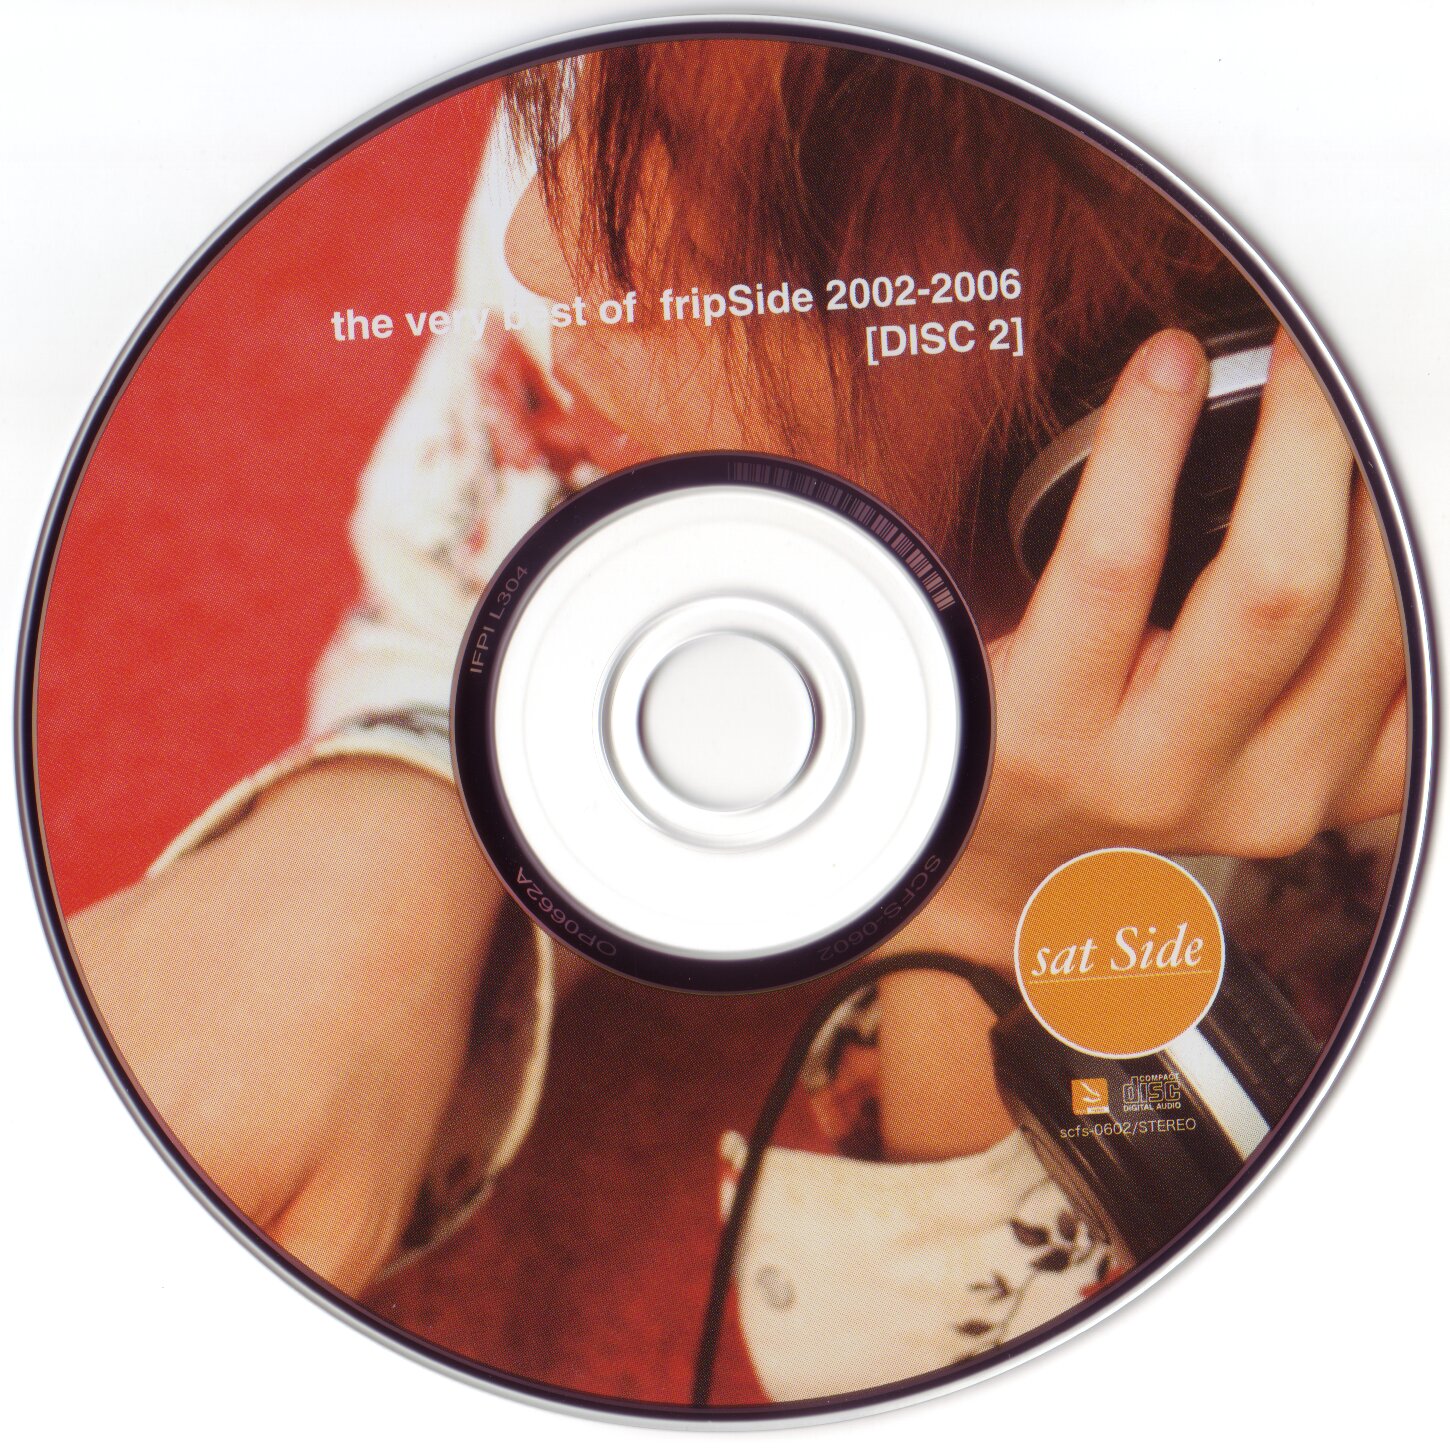 fripSide - the very best of fripSide 2002-2006 (2006) MP3 